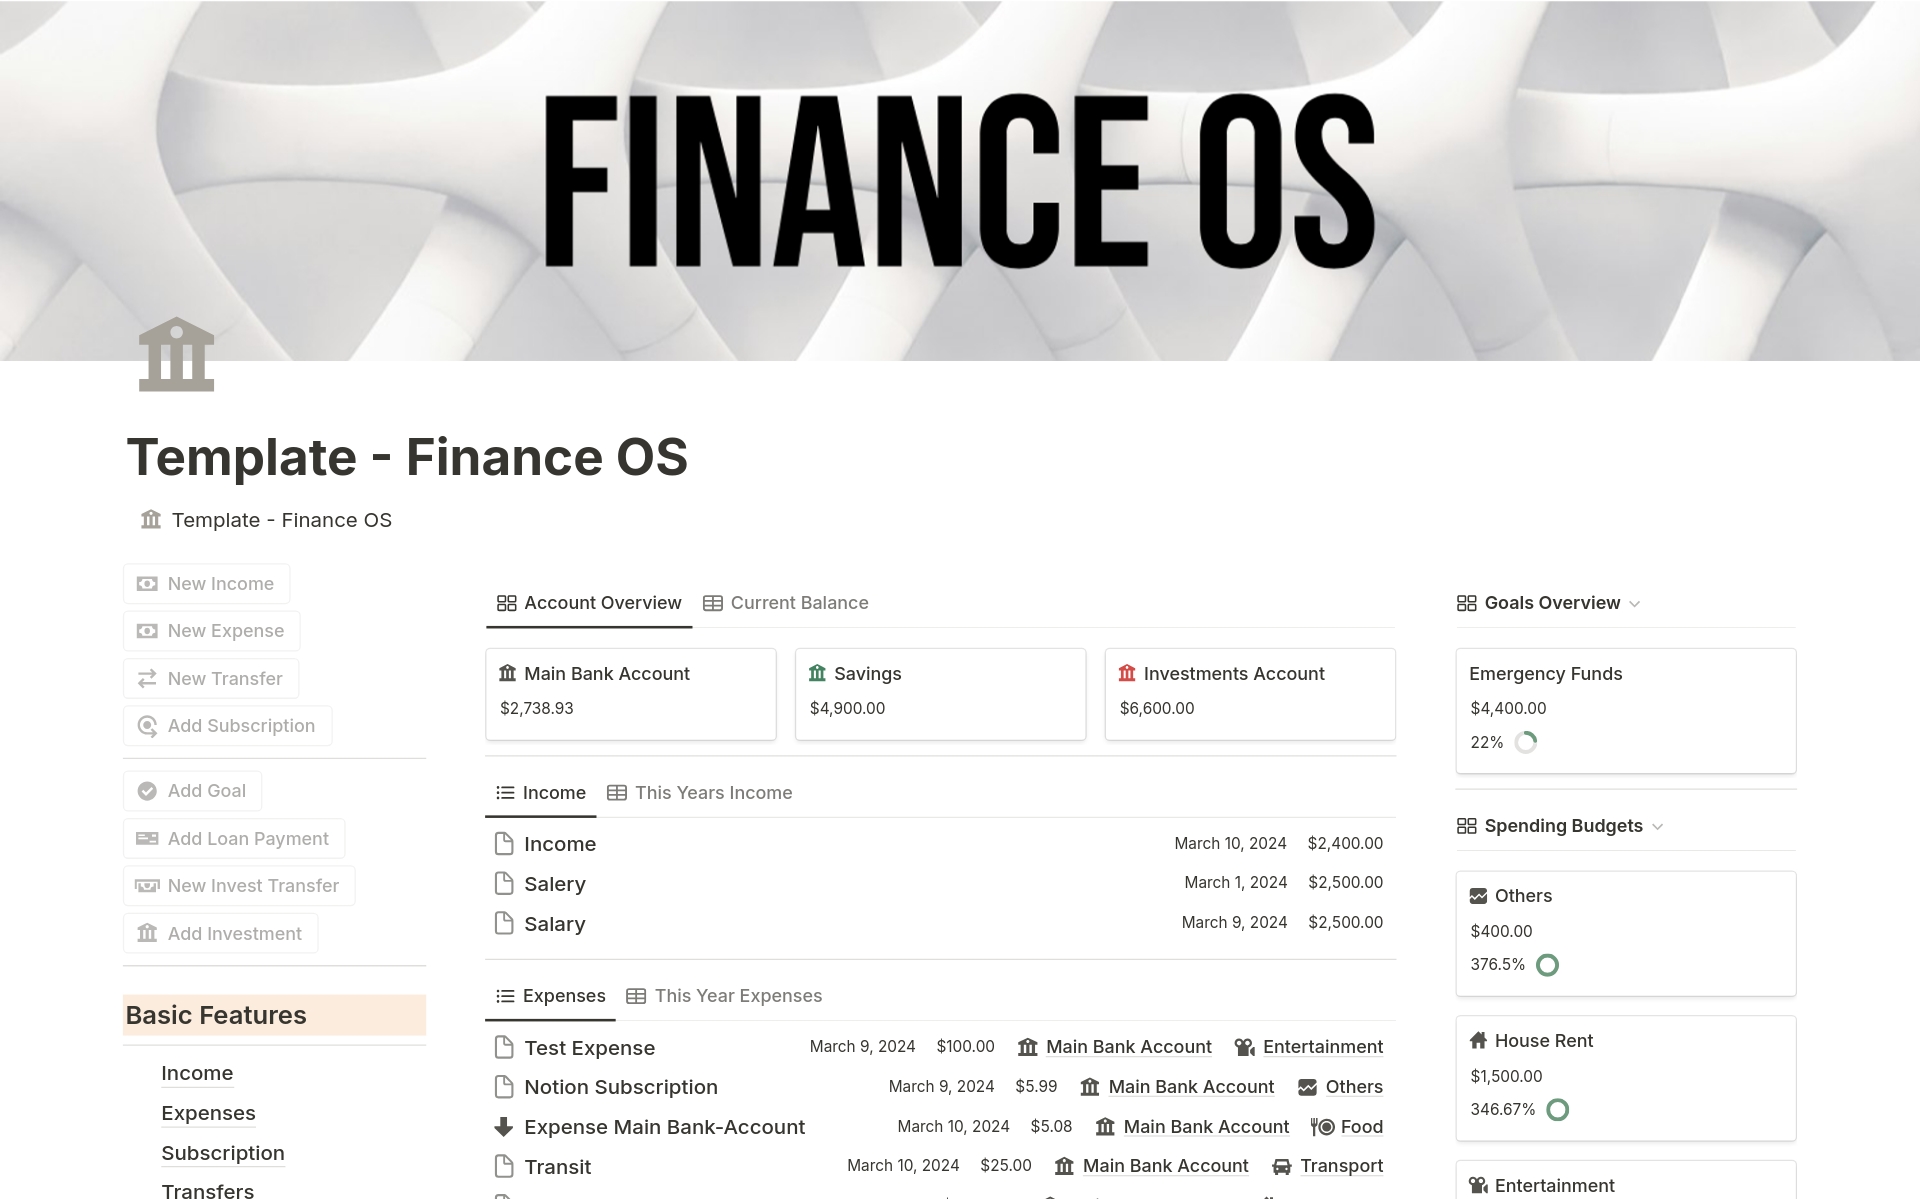 Discover our Finance OS Template: Your all-in-one tool for tracking income, expenses, debt management, and investments. Structured, clear, and customizable for financial freedom. Use "Notion10" on Gumroad for 10% Off. 